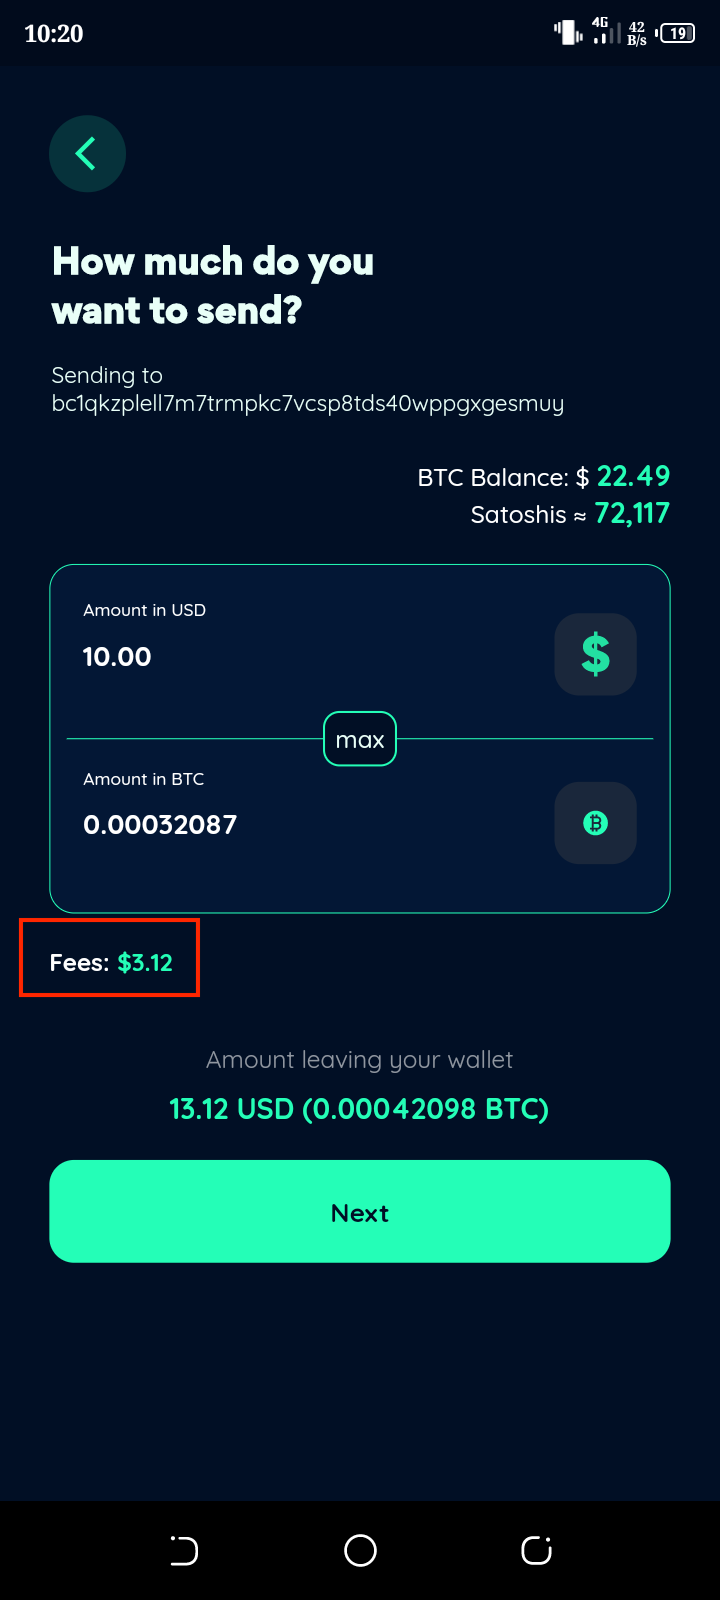 Transaction sending confirmation screen - Bitnob does not have an option to enable RBF when sending transactions.
